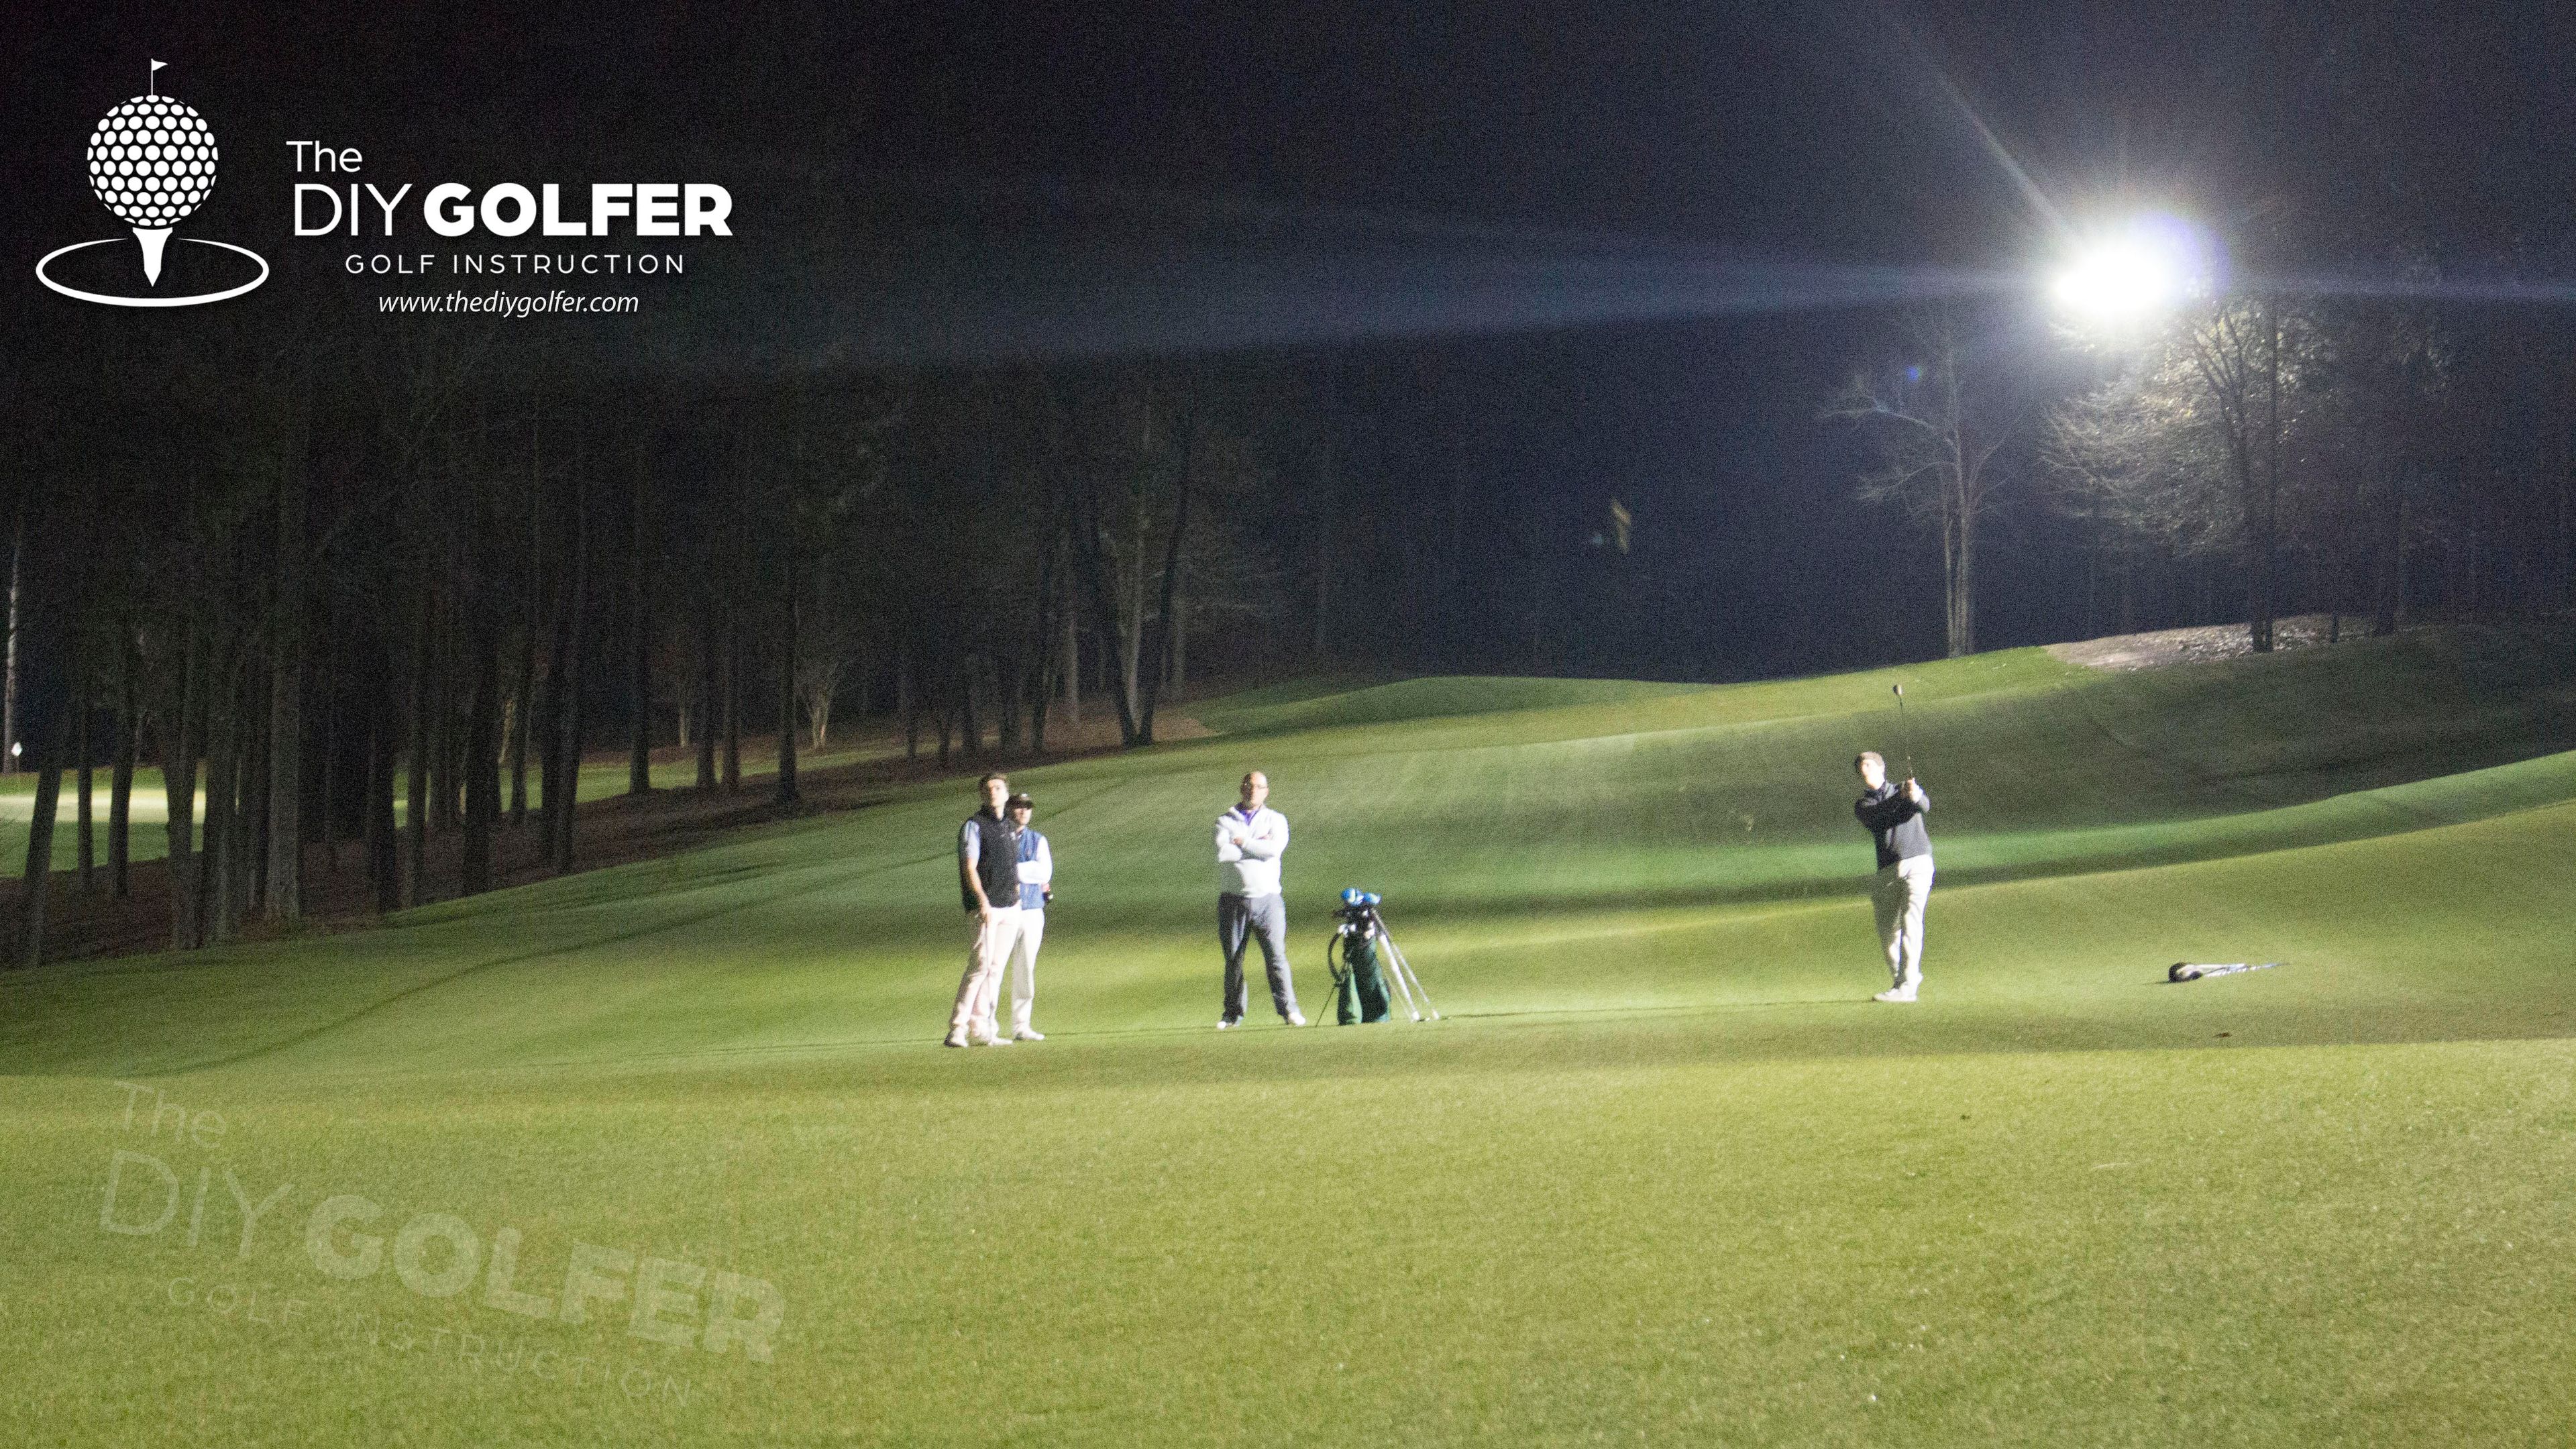 Night Golf Photo: Approach Shot from Distance